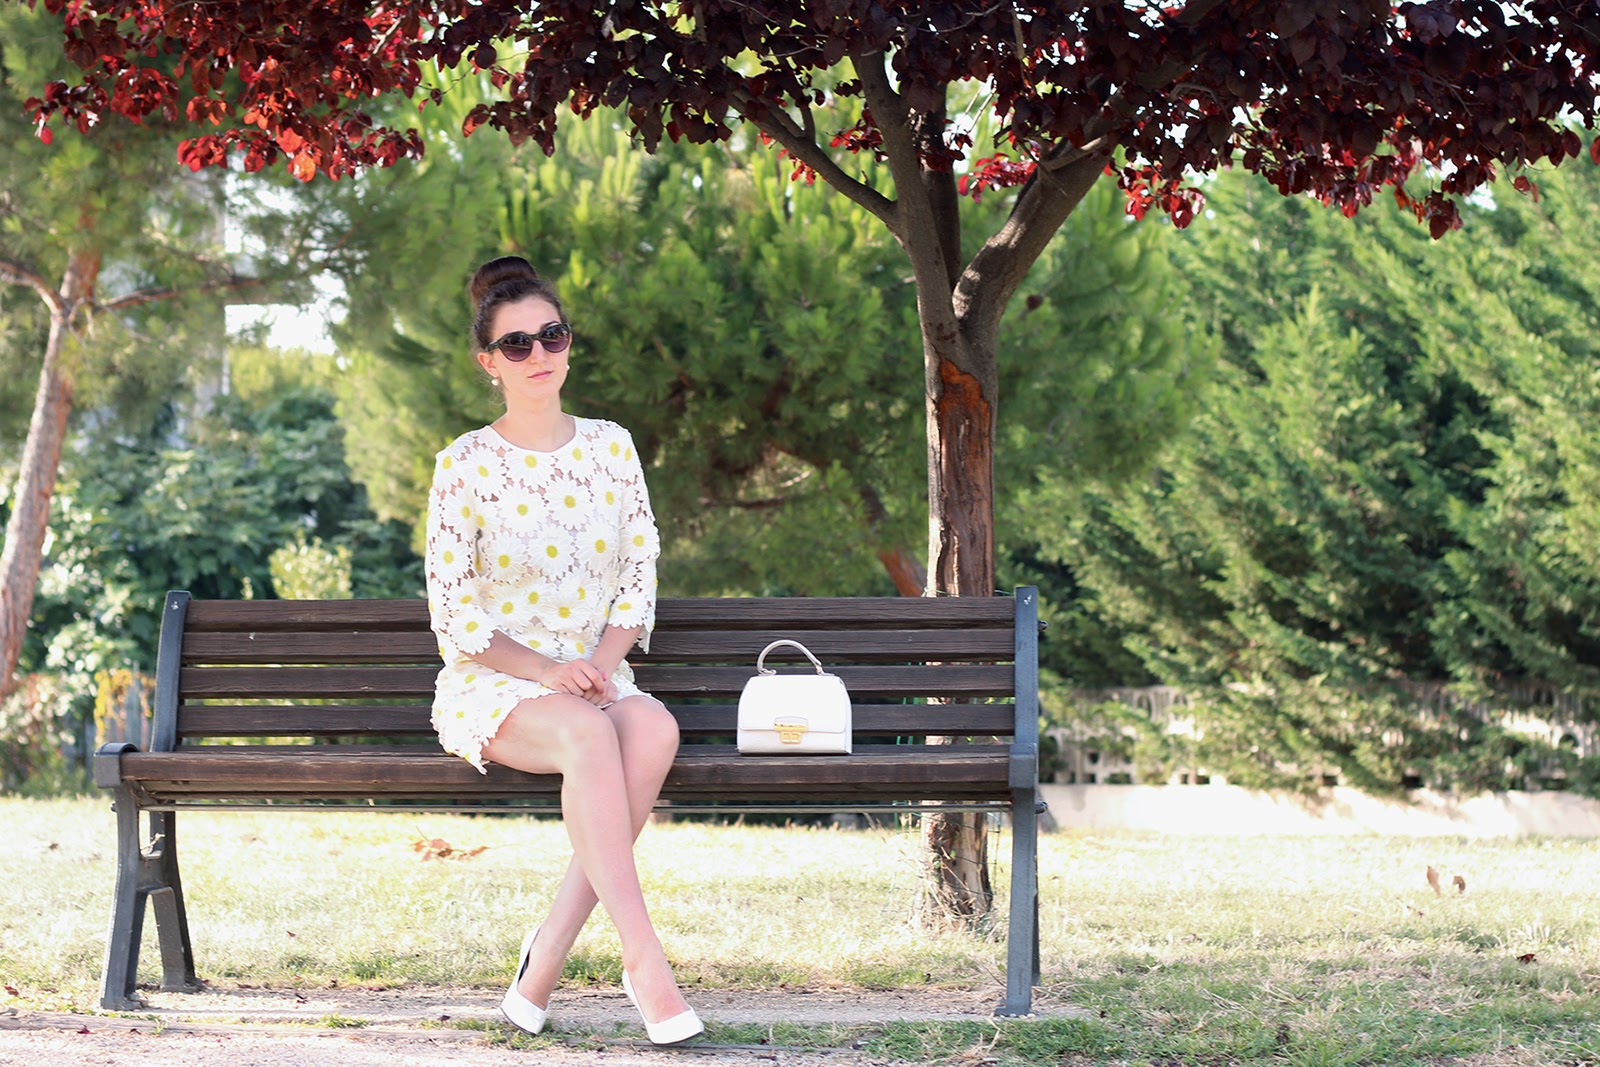 fashion style blogger outfit ootd italian girl italy trend vogue glamour pescara daisy dress chicwish margherite vestito new look bag white heels